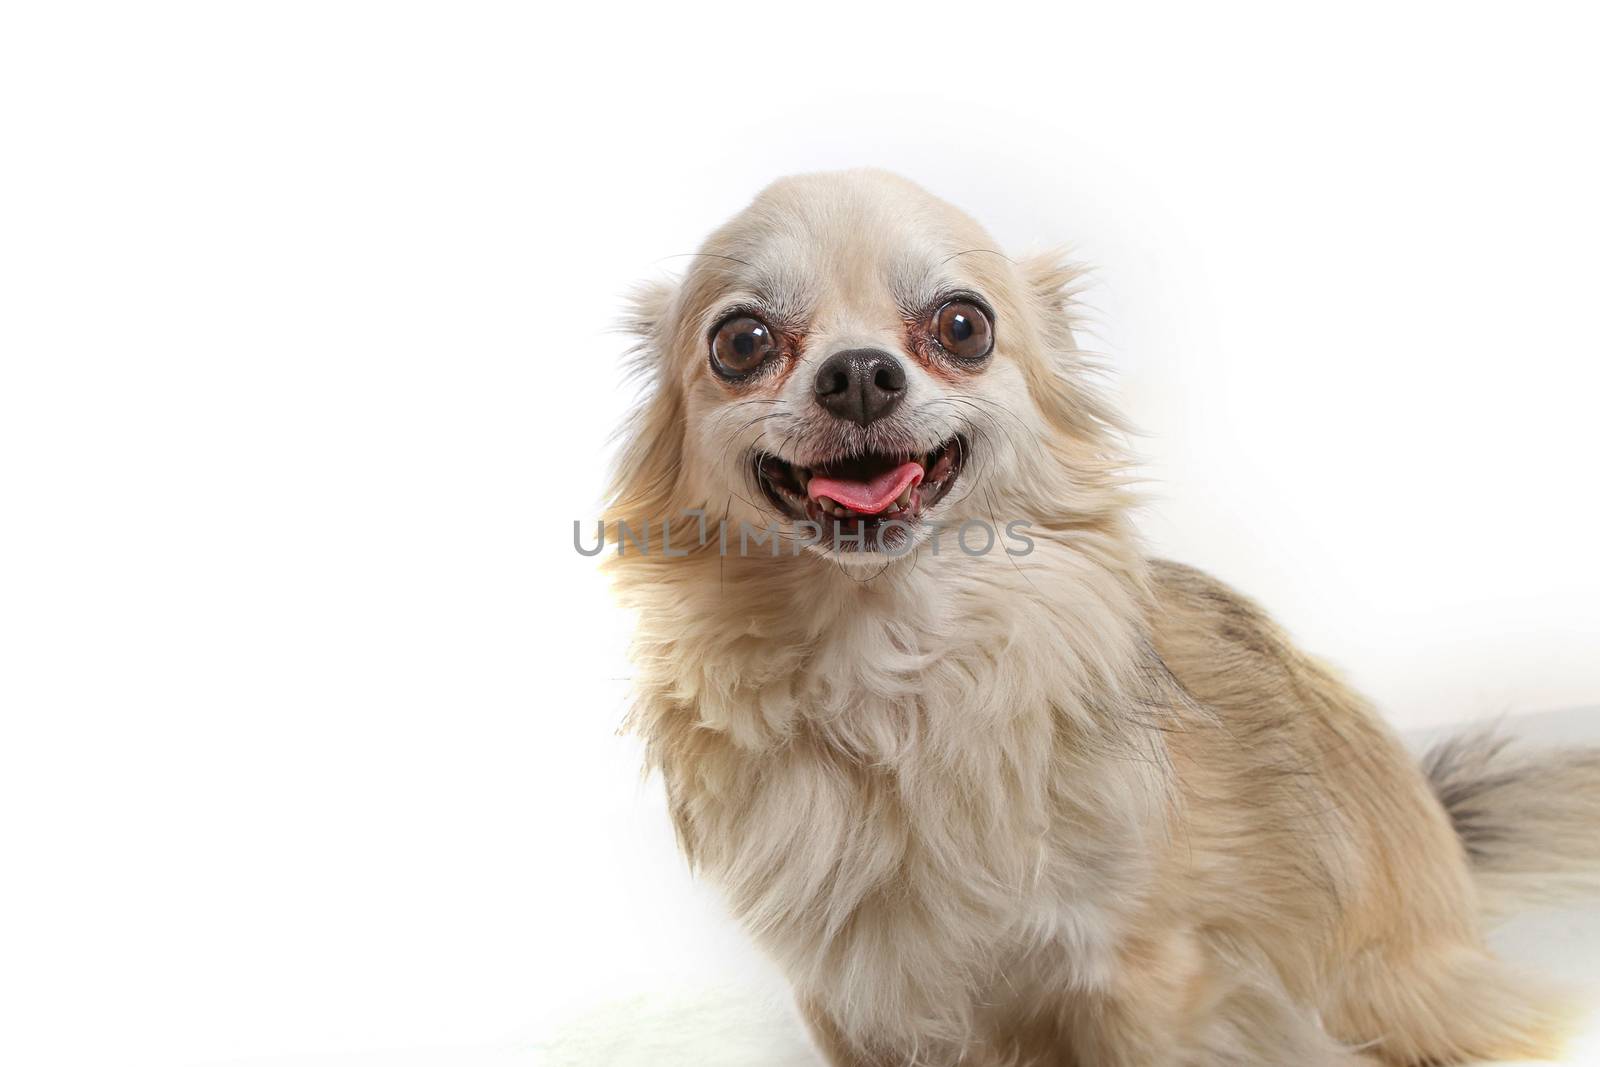 companion dog smiling with white background. Studio photo with copy space